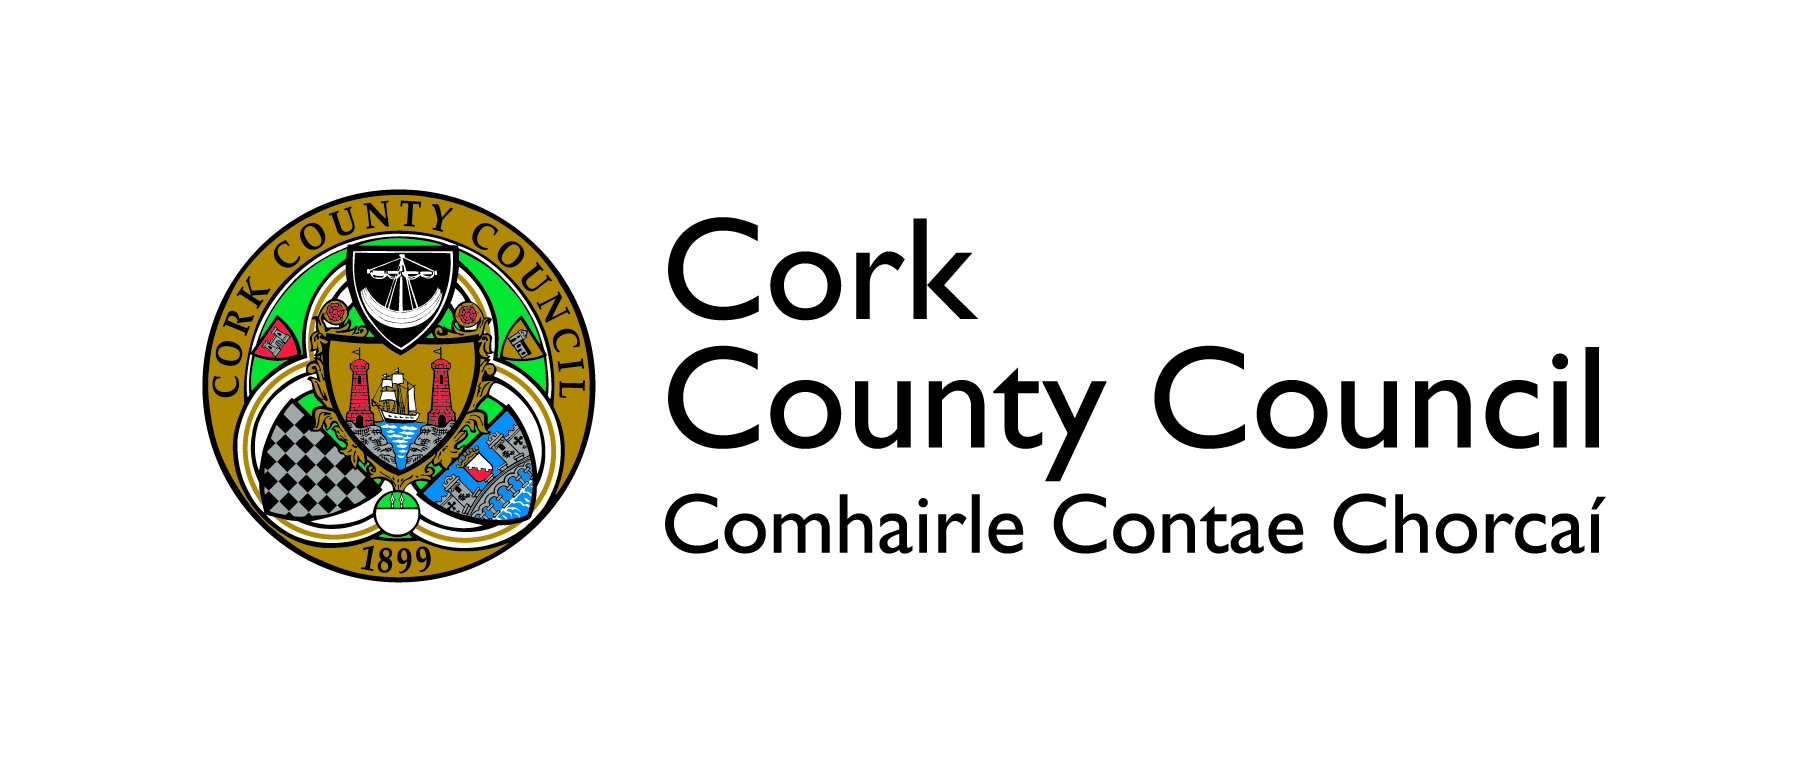 Cork County Council Launches Commemorative Documentary Series